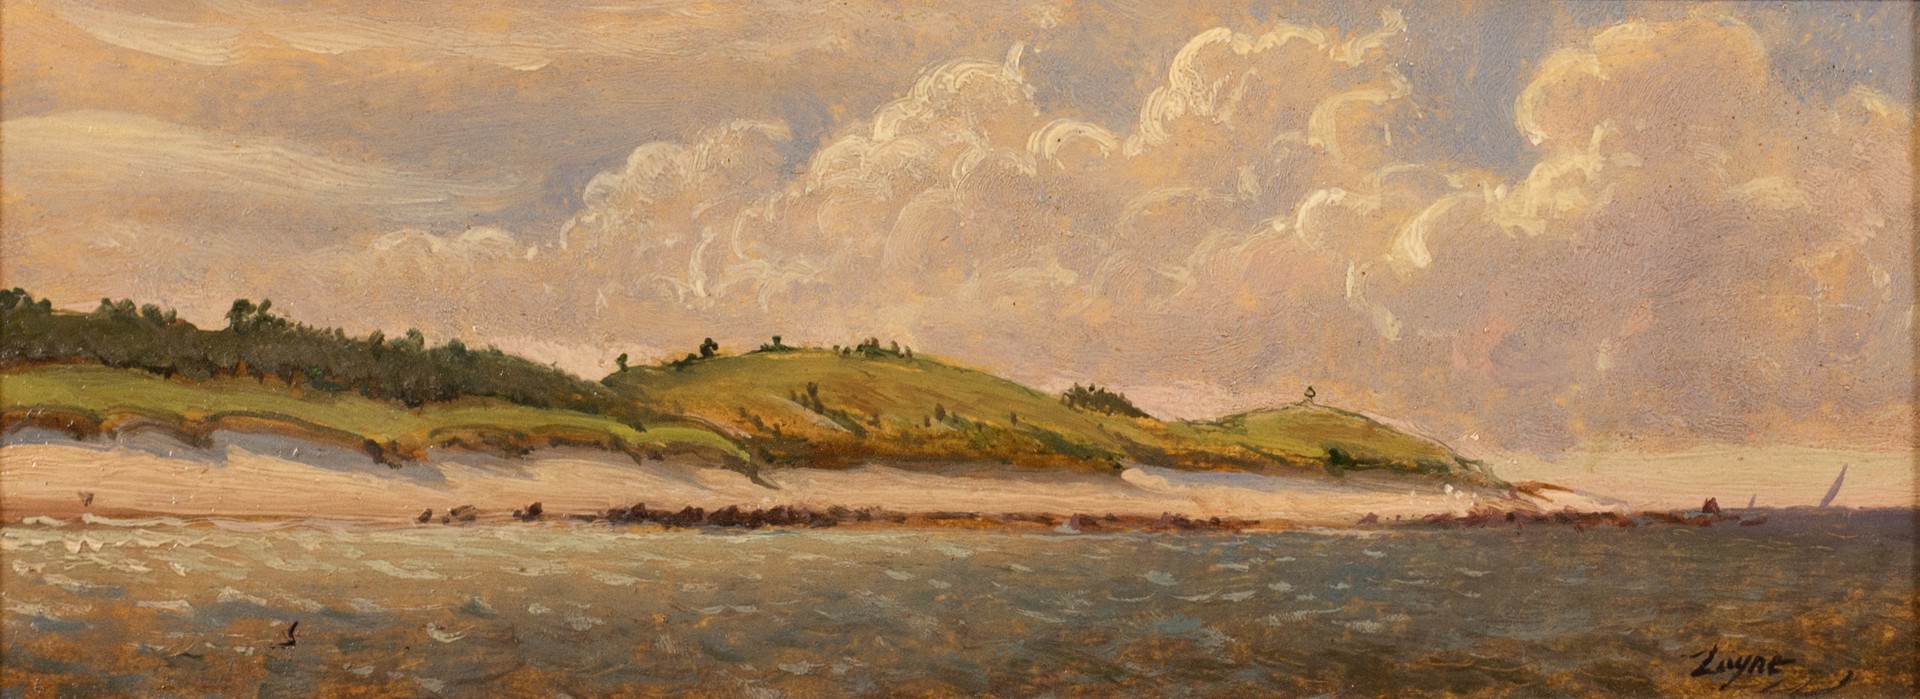 Beach Clouds/In the Bay by Peter Layne Arguimbau